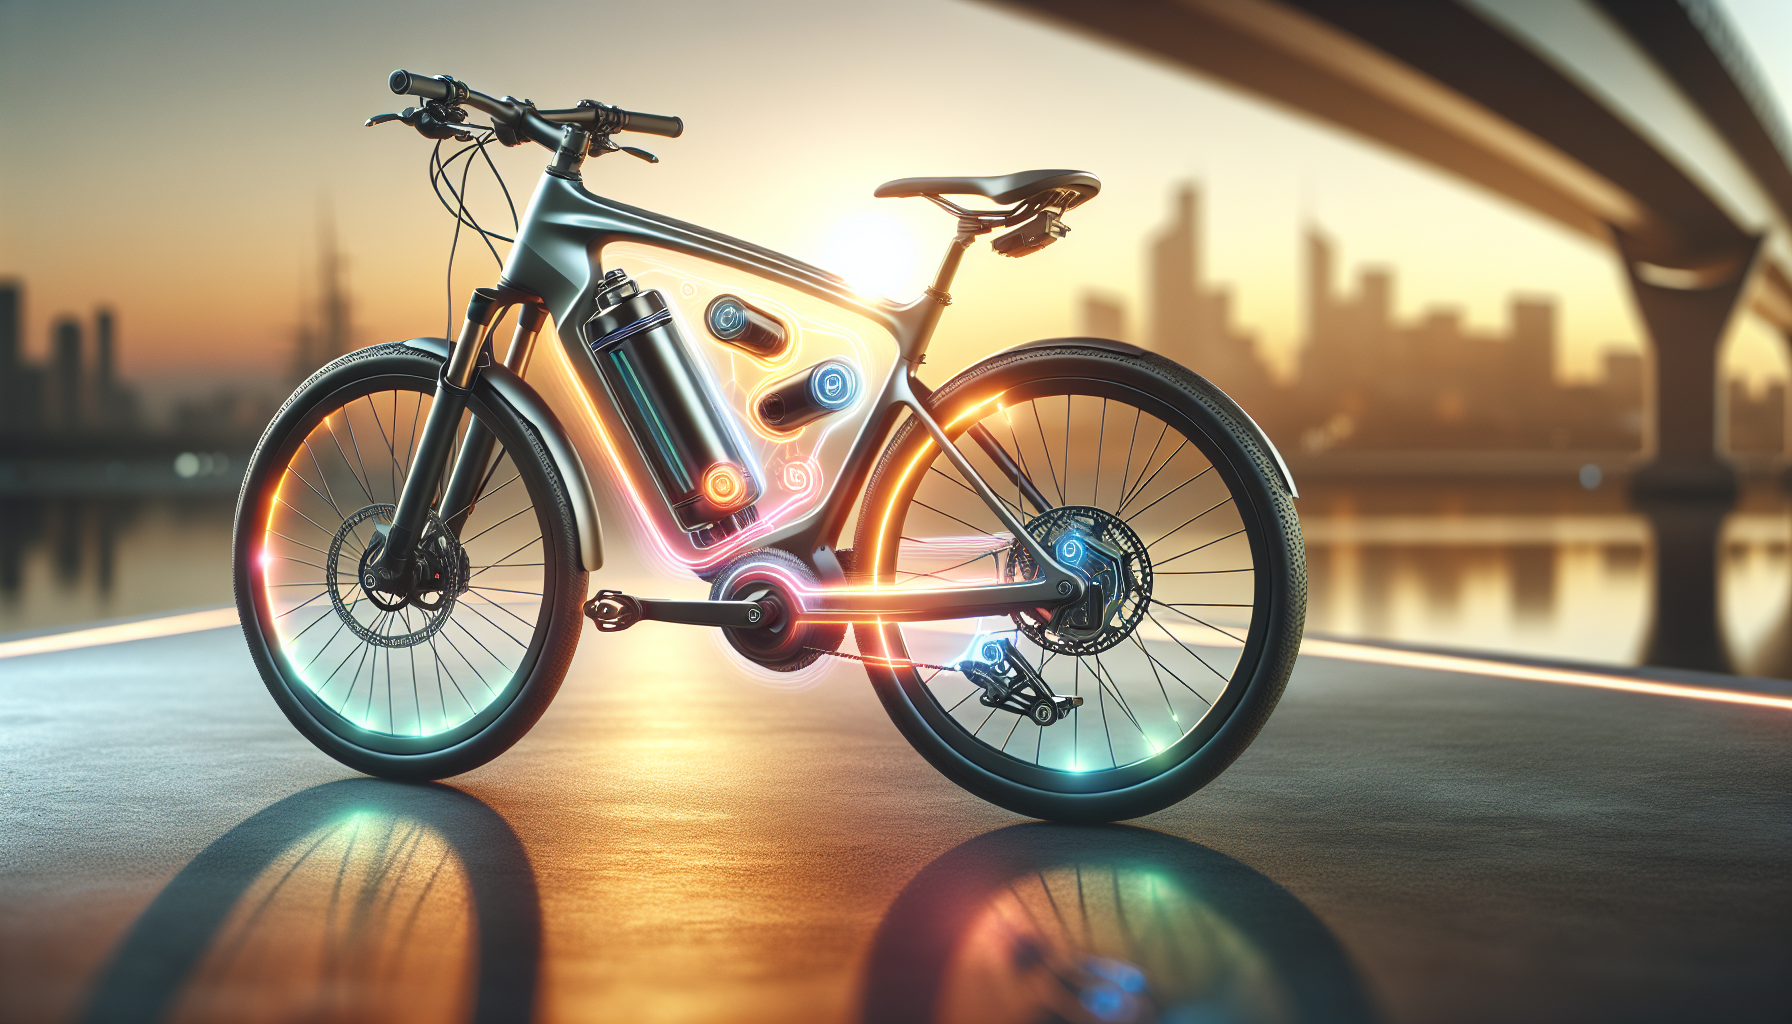 An illustration of a modern e-bike with electric motor and battery